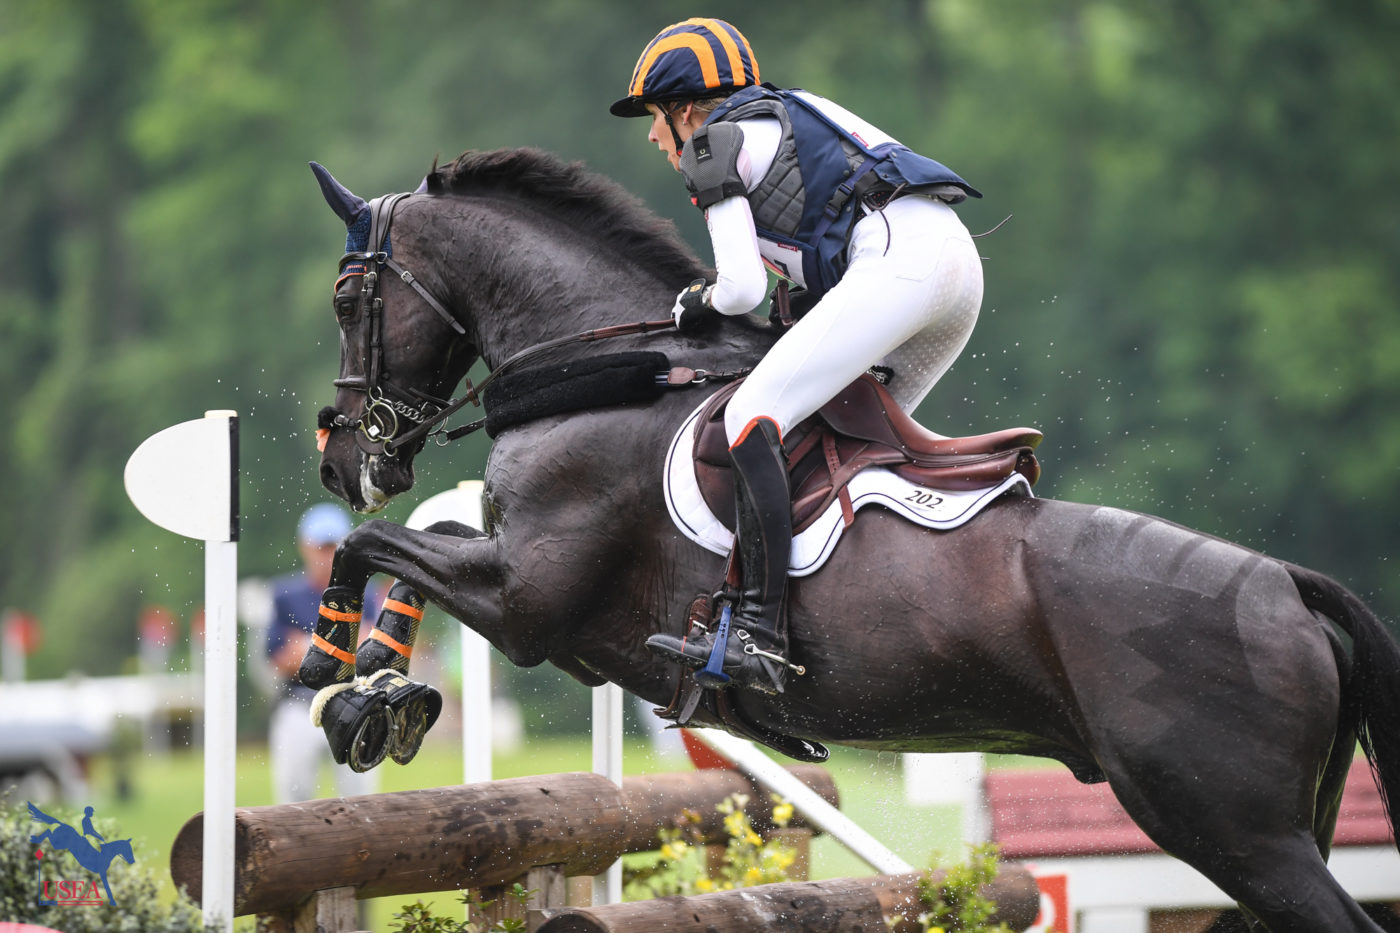 Cooley Nutcracker had no problem with the skinny out of the water in the CCI4*-L with Liz Halliday-Sharp. USEA/Lindsay Berreth photo